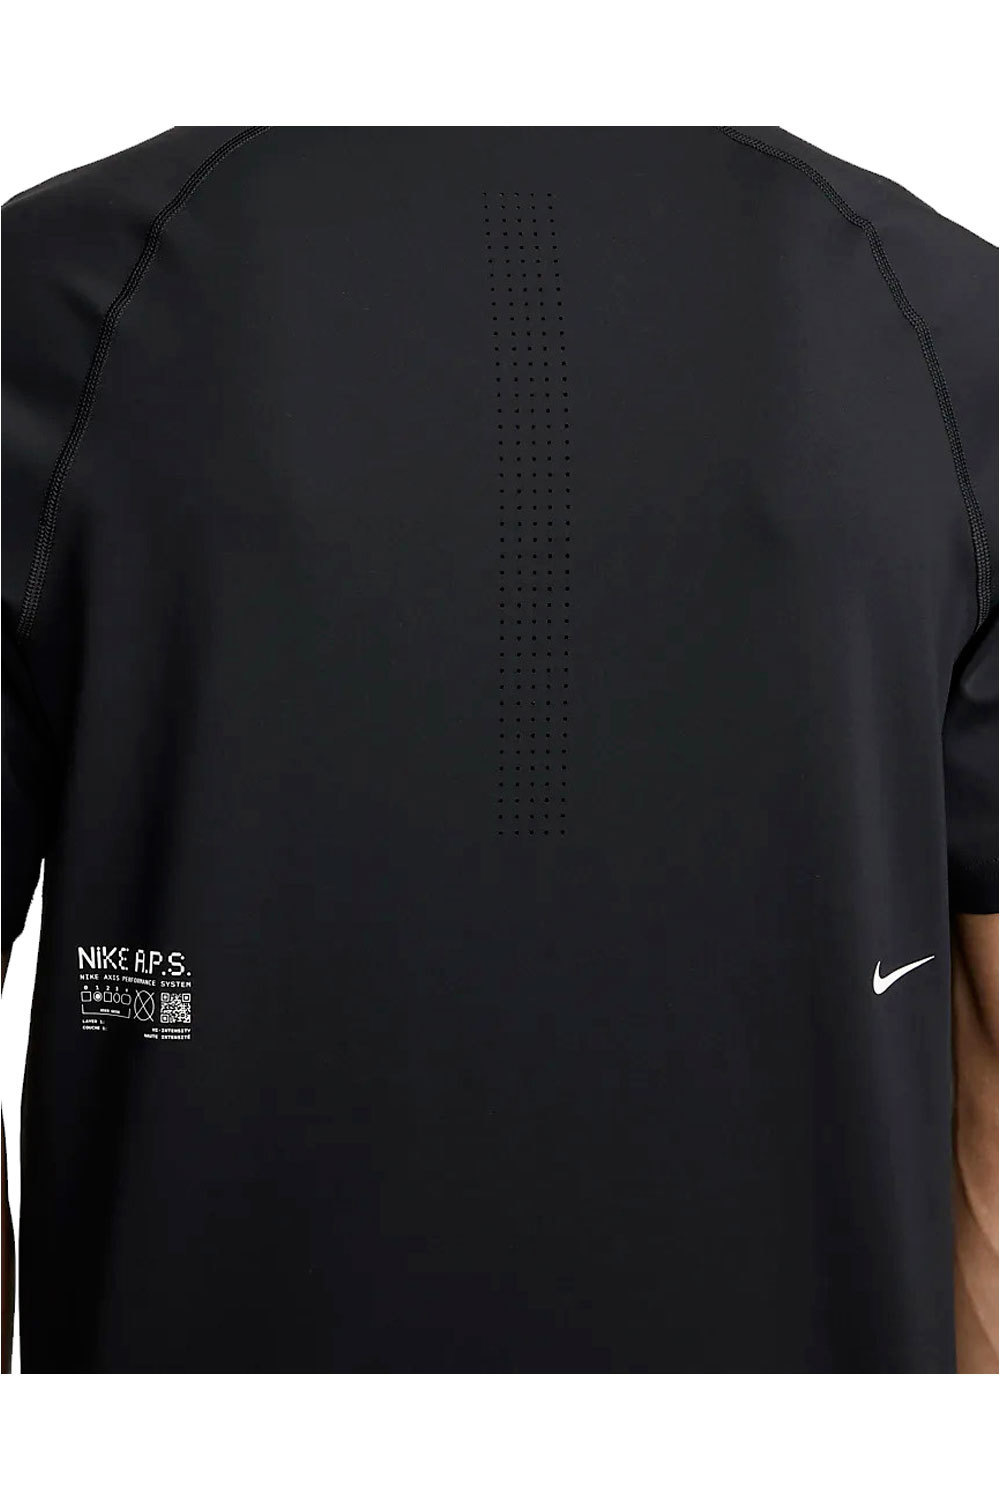 Nike camiseta fitness hombre M NK DFADV AXIS TOP SS 03